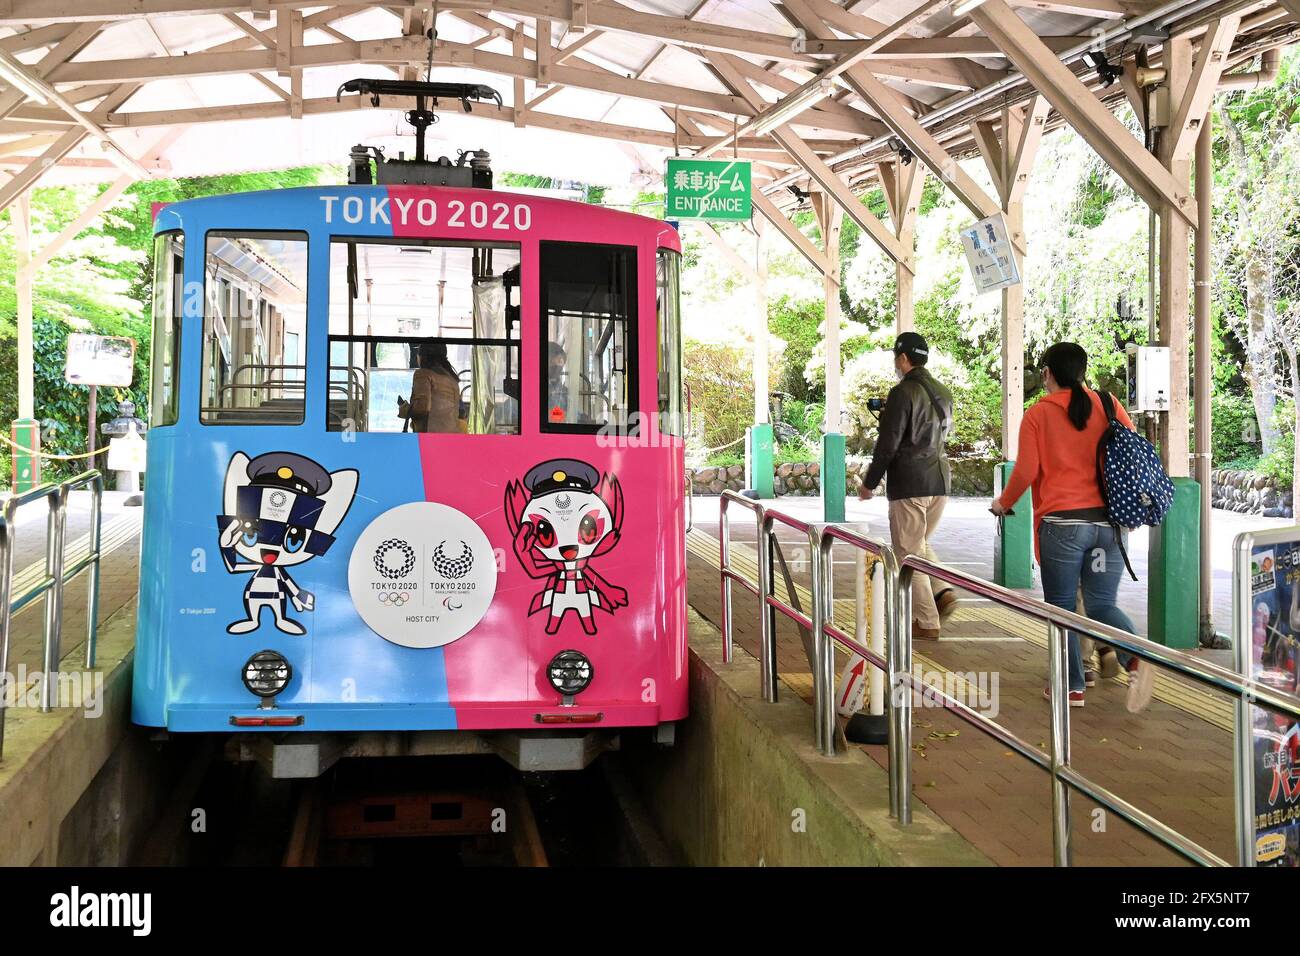 Tokyo 2020 Olympic Games wrapping Cable car is seen at Mt.Takao station in Hachioji, Tokyo, Japan on April 18, 2021. Stock Photo